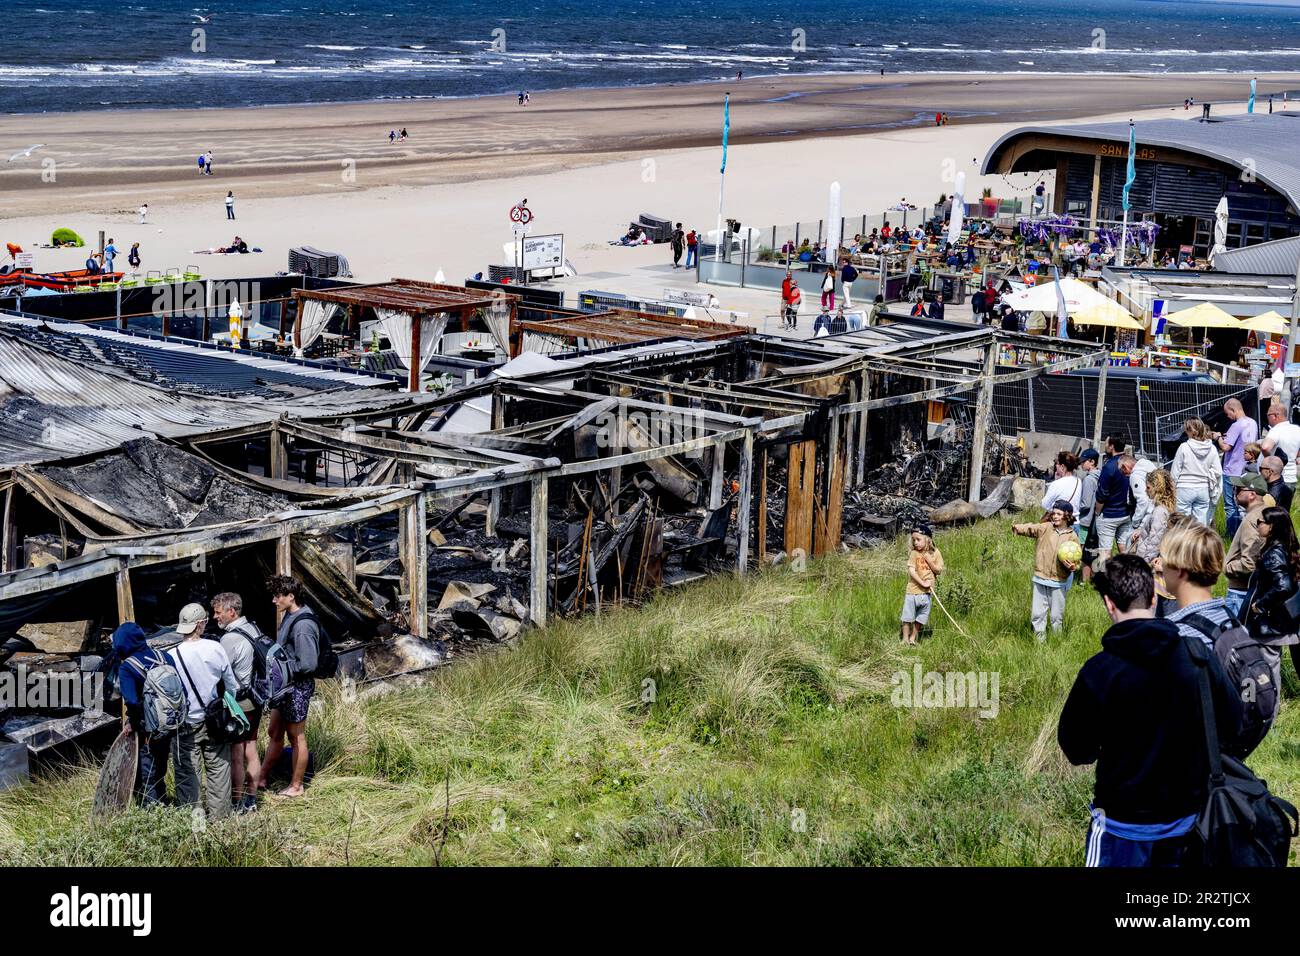 BLOEMENDAAL - Beachgoers at the burnt-down beach bar Bloomingdale. The owners of the famous beach club in Bloemendaal aan Zee feel great bewilderment and a lot of sadness about the burning down of their famous beach pavilion. ANP ROBIN UTRECHT netherlands out - belgium out Credit: ANP/Alamy Live News Stock Photo